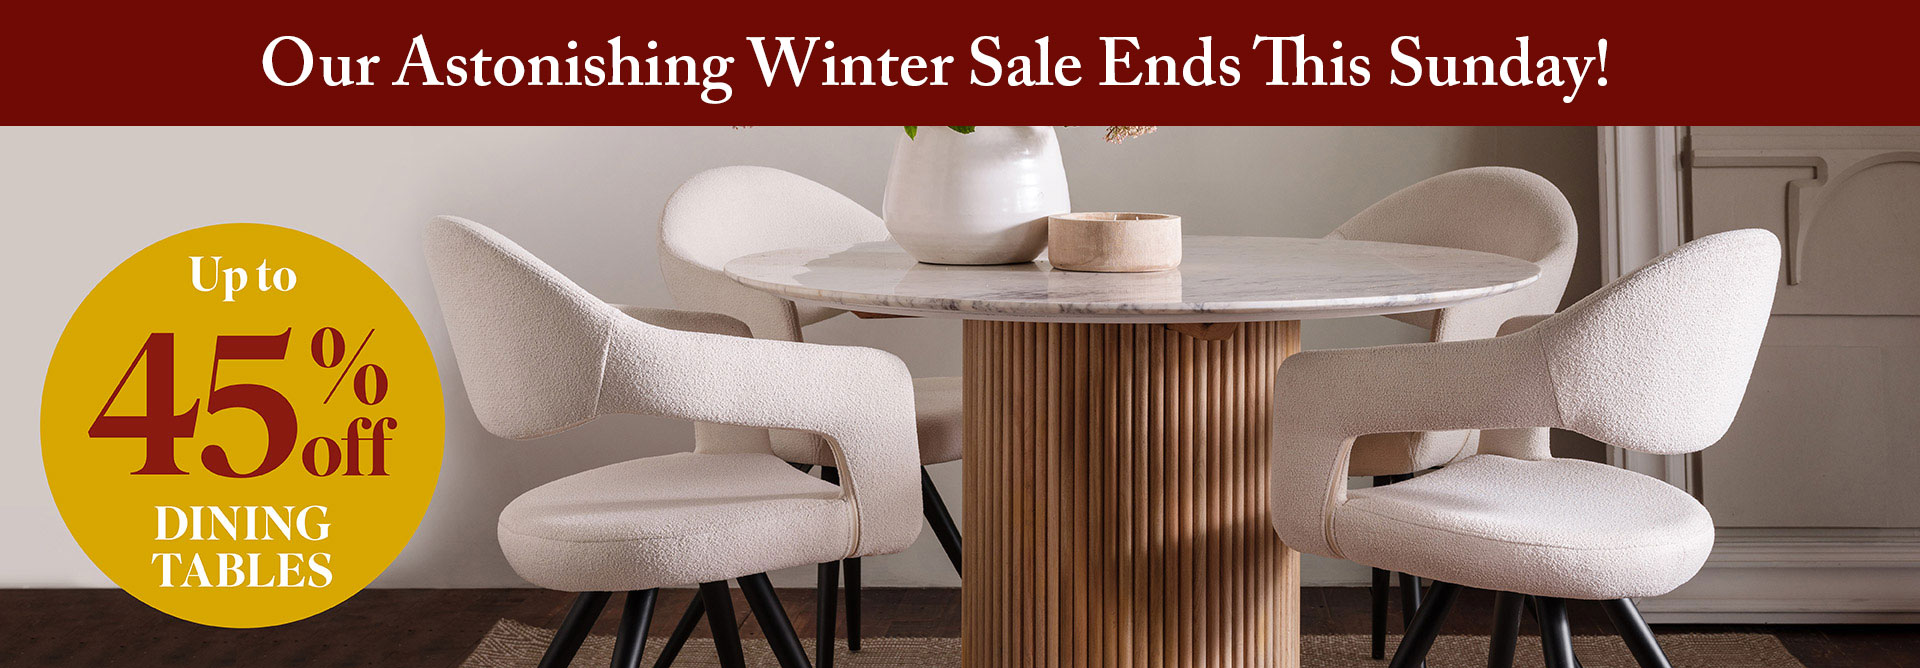 Up to 45% Off Dining Tables